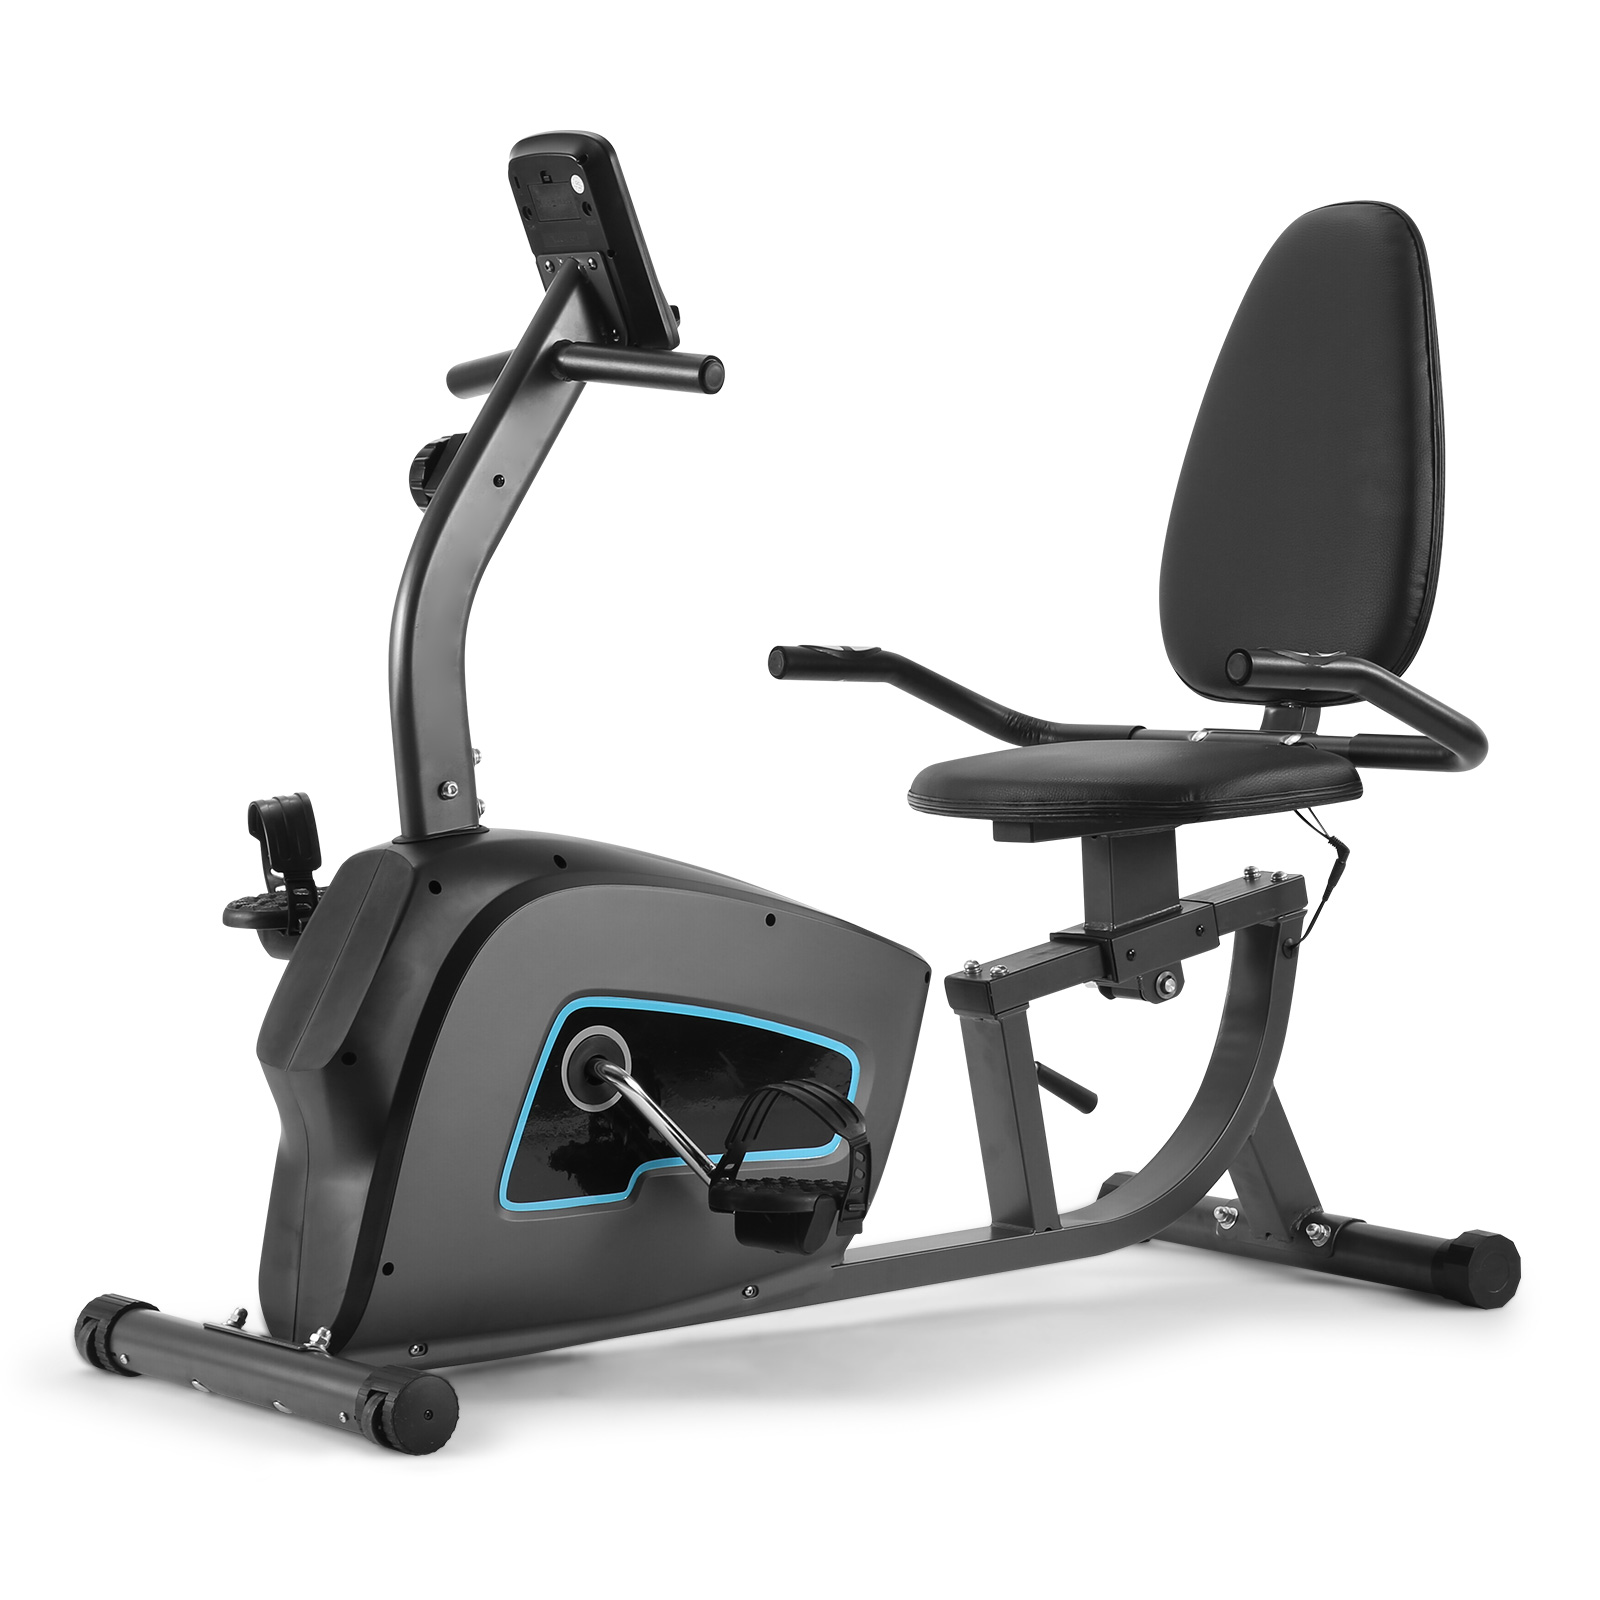 Maxkare Exercise Bike Indoor Recumbent  Exercise Bike Stationary with Adjustable Seat and 8 Resistance Level Seat Height Adjustment - image 1 of 13